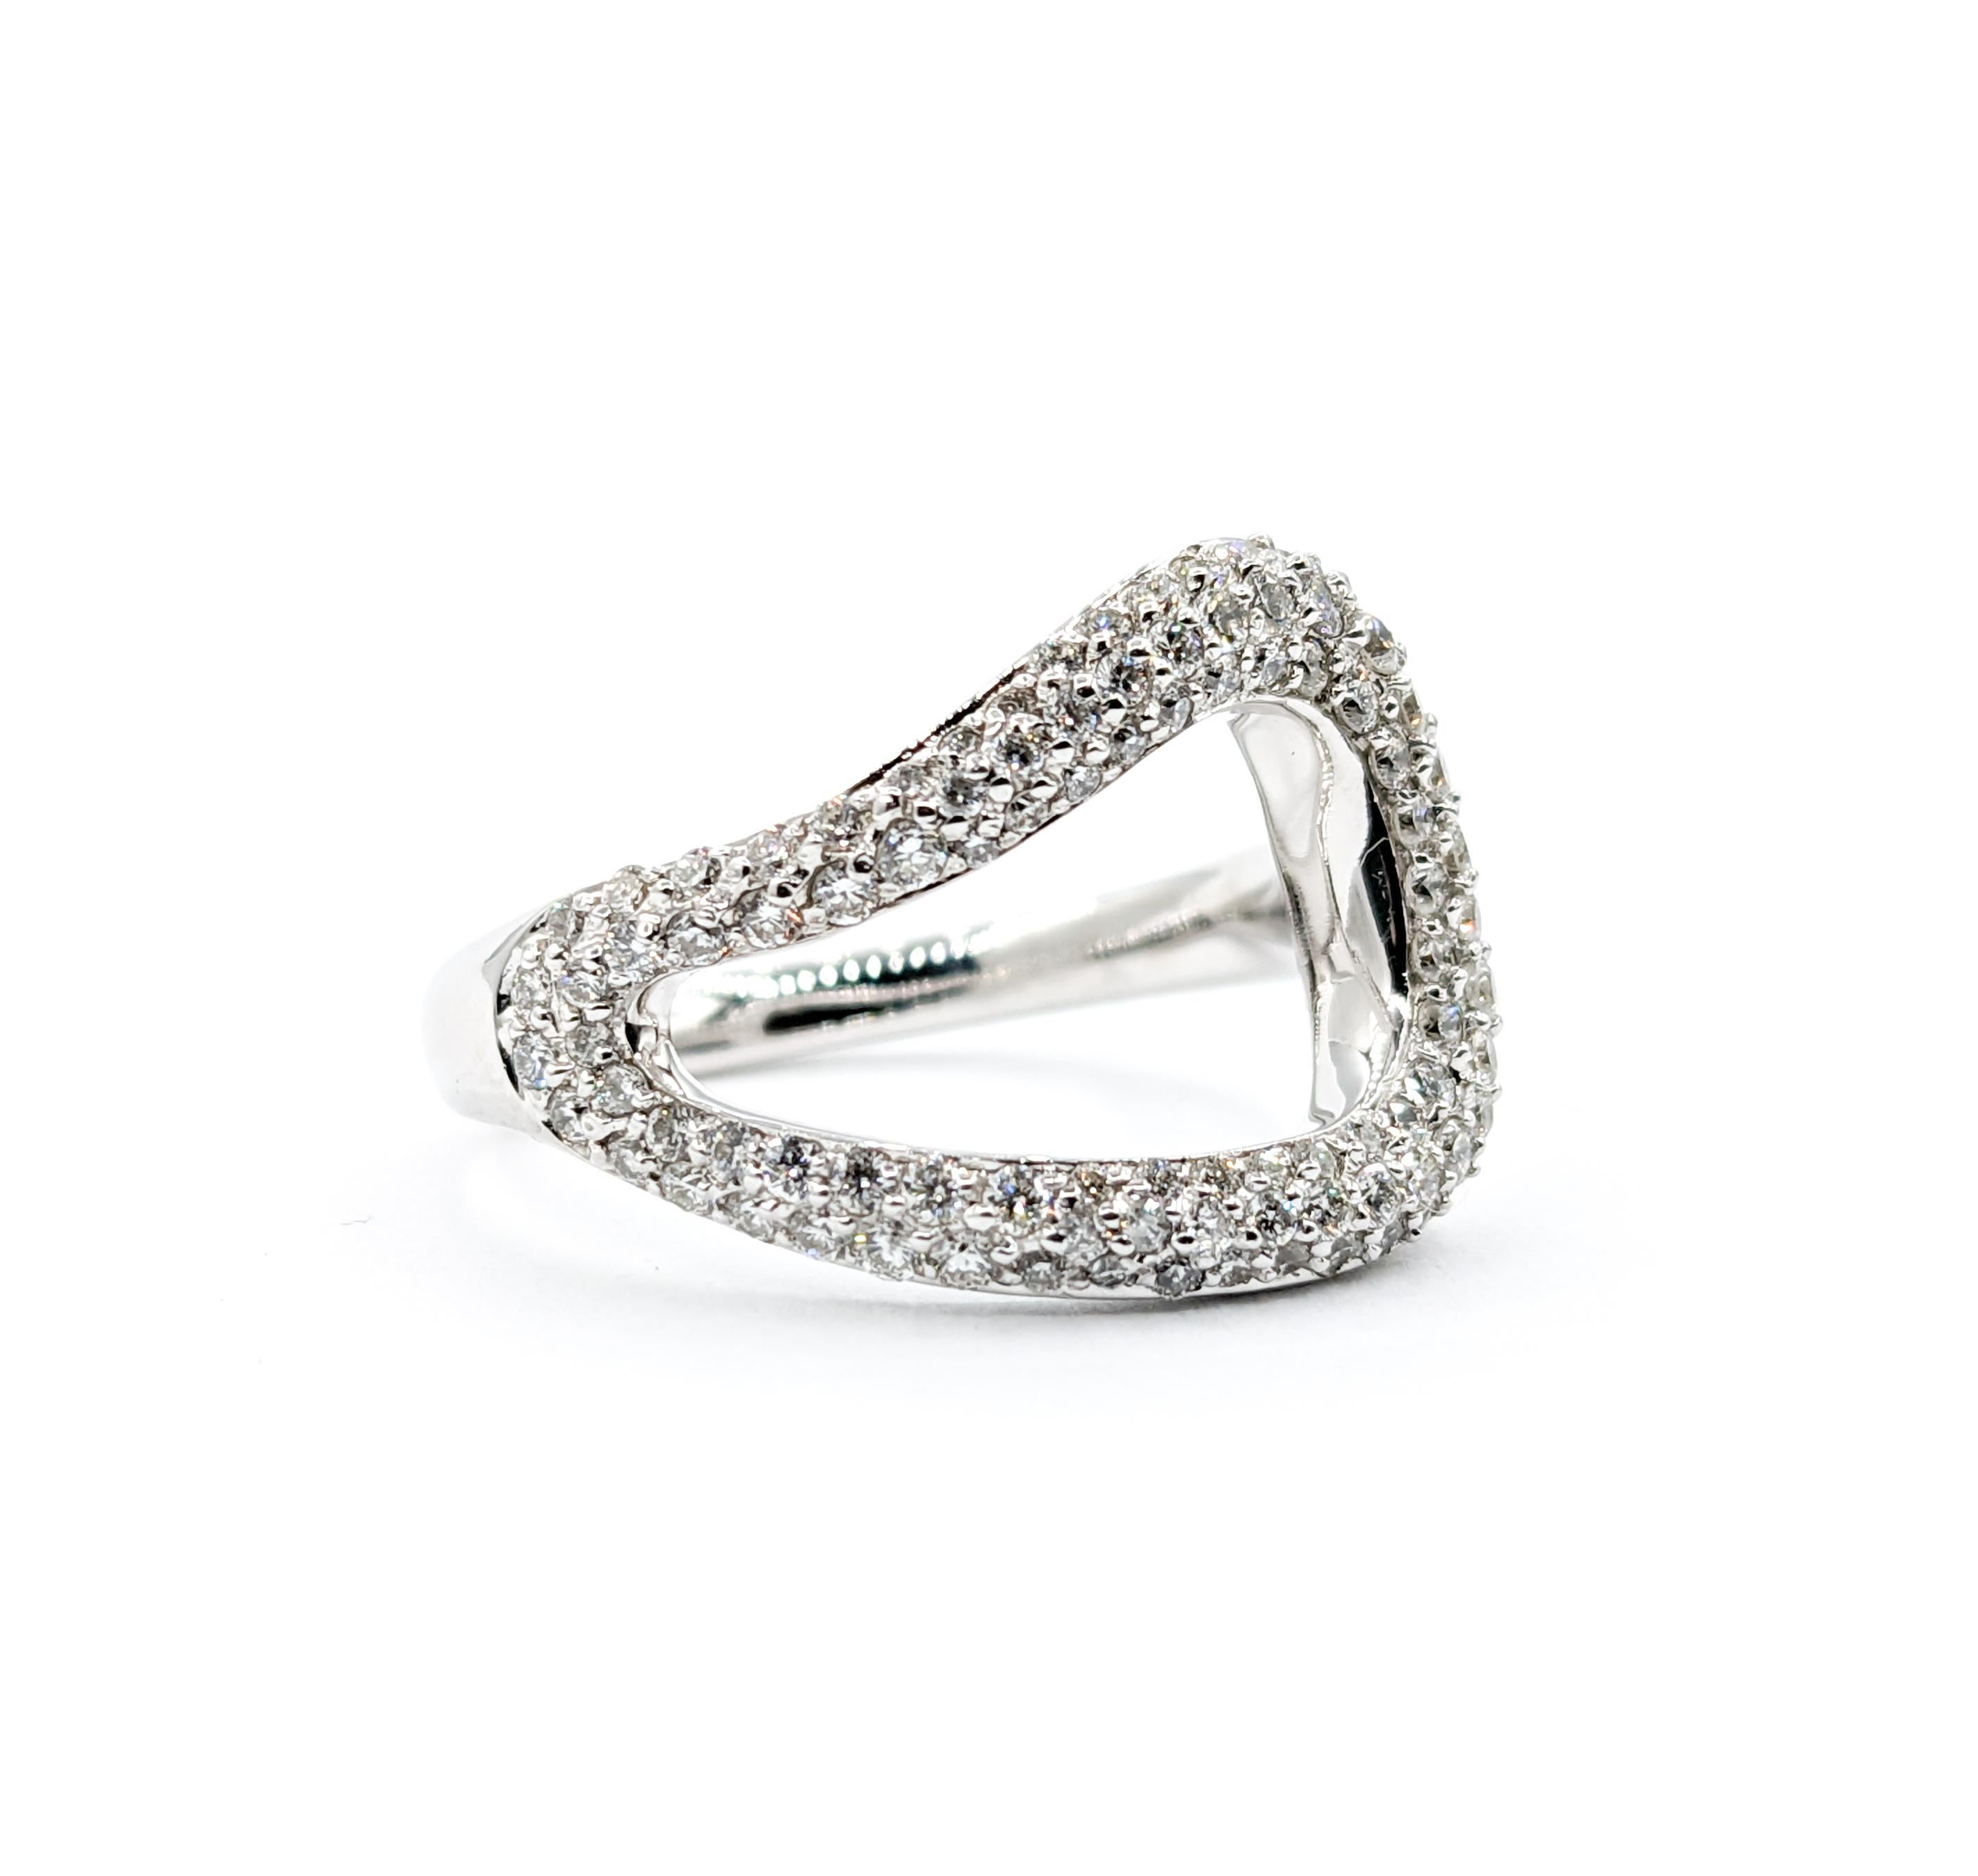 .50ctw Pave-Set Tear Diamond Ring In White Gold

Introducing a stunning ring in 14kt white gold, and embellished with a dazzling half-carat total weight of pavé-set diamonds. Each diamond sparkles with an I clarity and a near-colorless white hue,